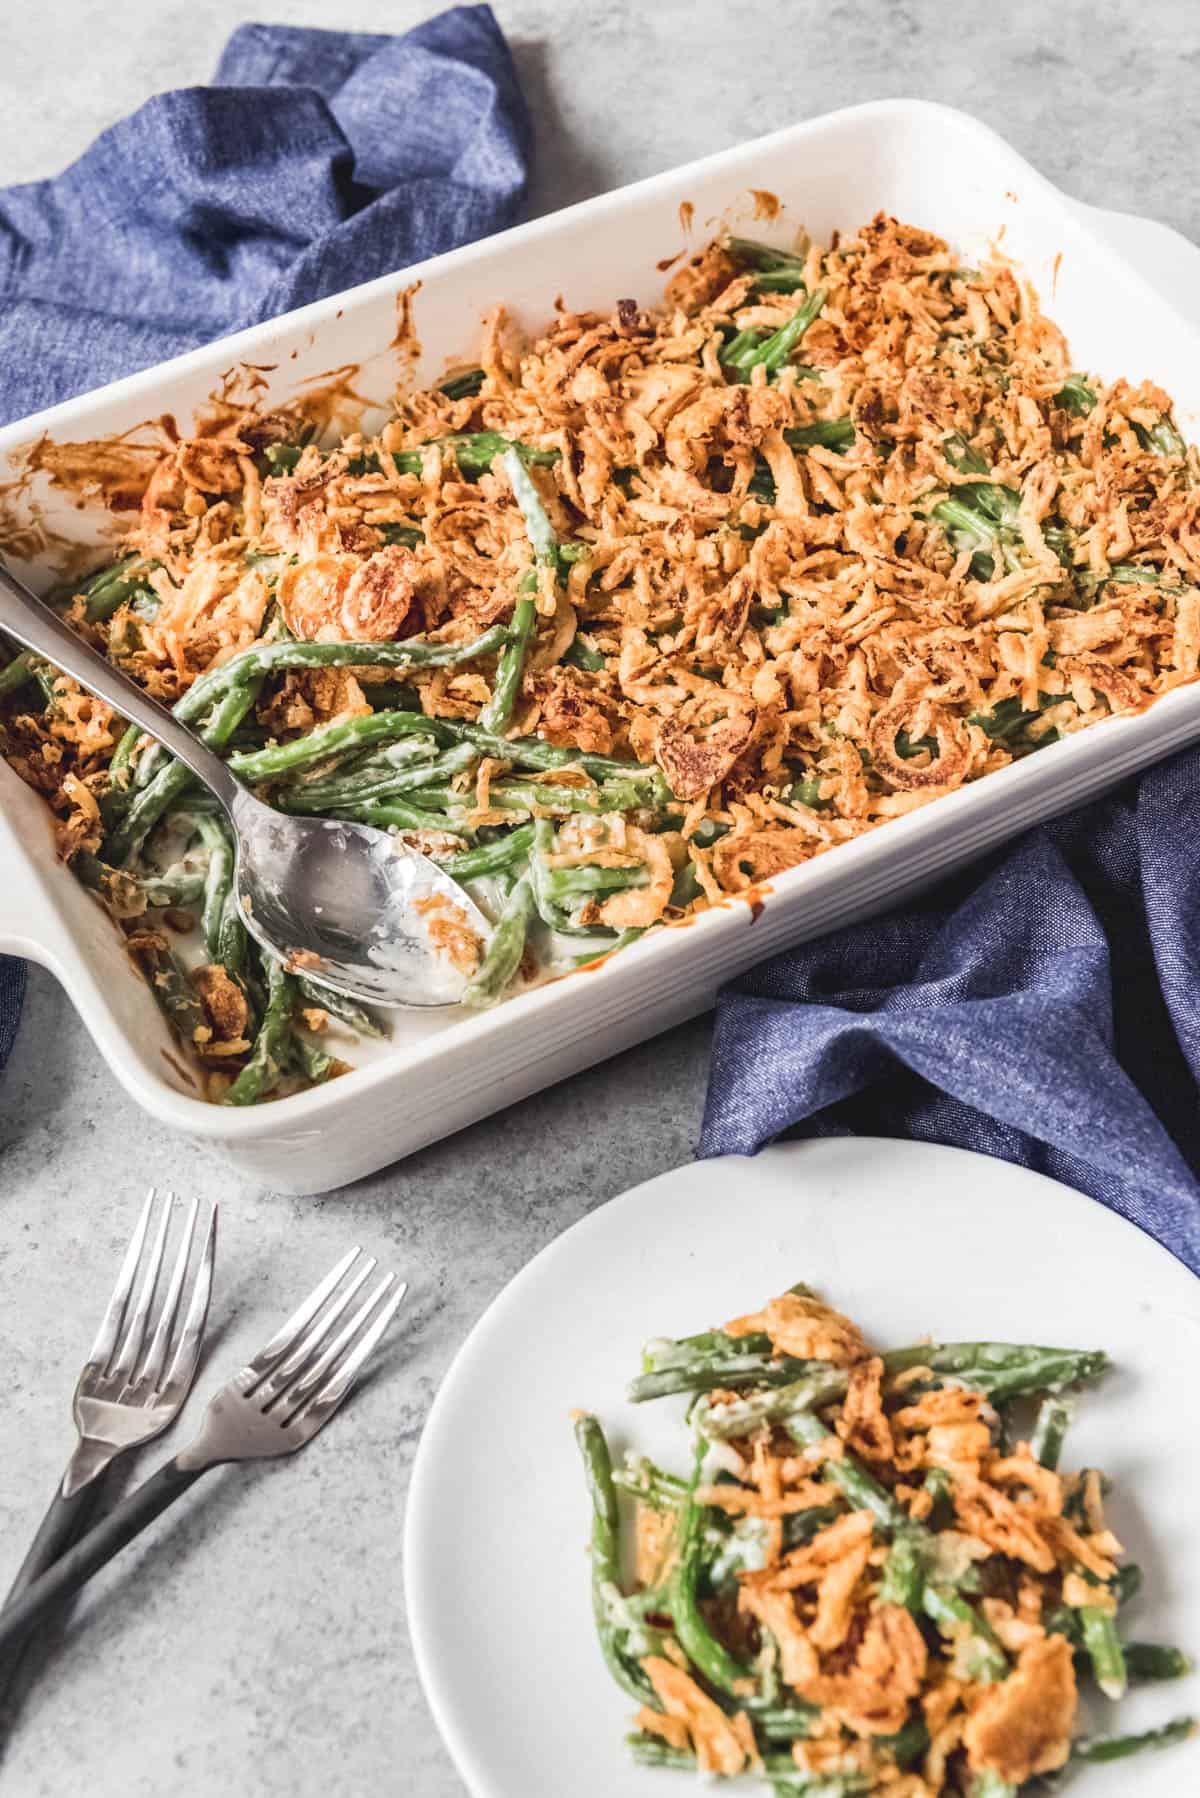 An image of a traditional Thanksgiving side dish, Campbell's green bean casserole, except made without any canned ingredients.